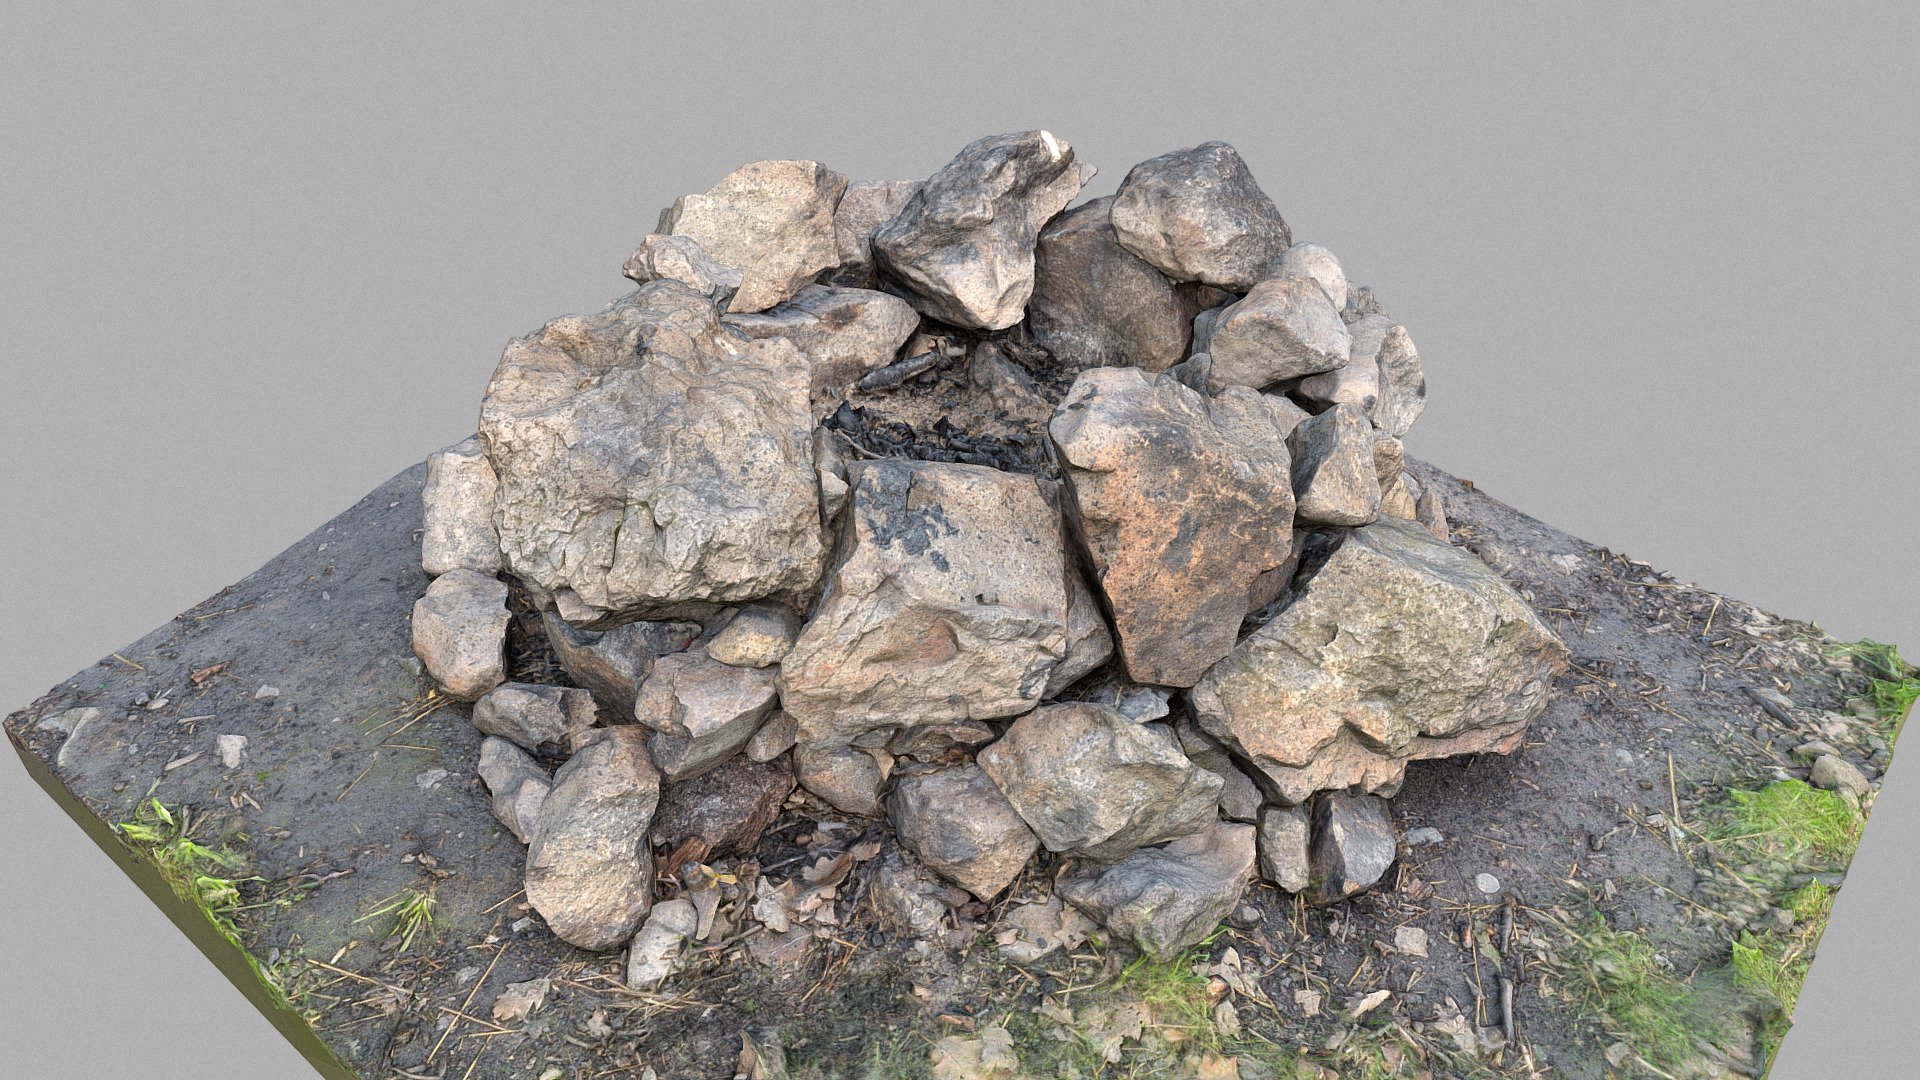 Fireplace fire pit hole in meadow forest, campfire natural made of stones

photogrammetry scan (24MP, 100+) - Fireplace fire pit hole campfire made of stones - Buy Royalty Free 3D model by matousekfoto 3d model